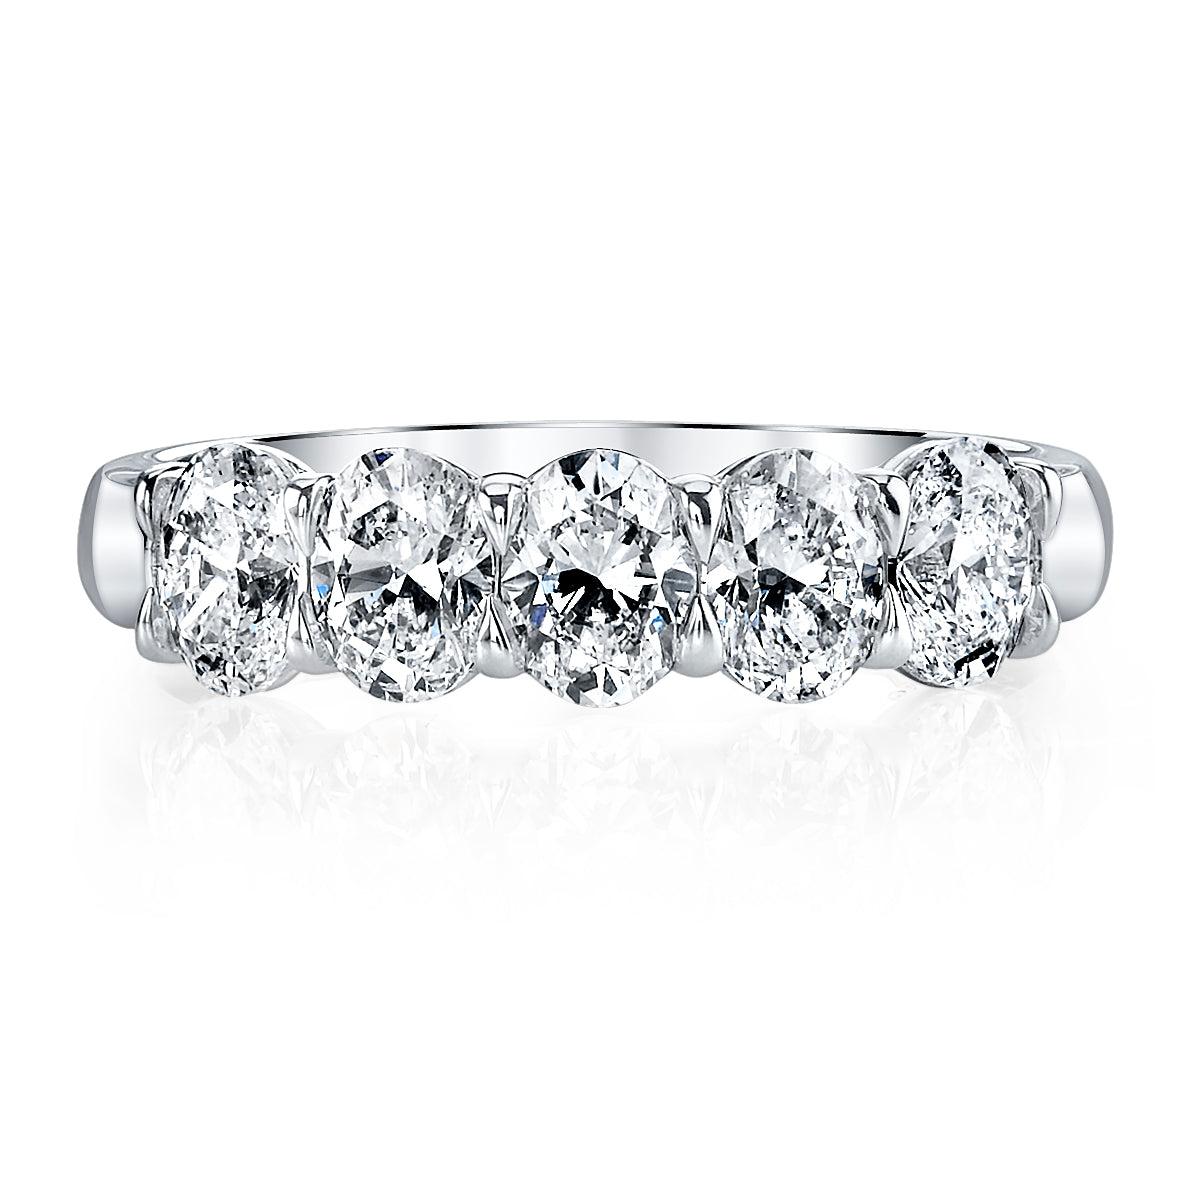 This elegant 5-stone Oval Diamond Cut Eternity Band showcases 5 diamonds, framed by a beautiful buttercup-shaped band crafted in platinum.  

Oval Diamond Cut Eternity Band
Diamonds: 5pcs 2.01ct G/H SI.
Buttercup Band.
Platinum.
Size 6.
